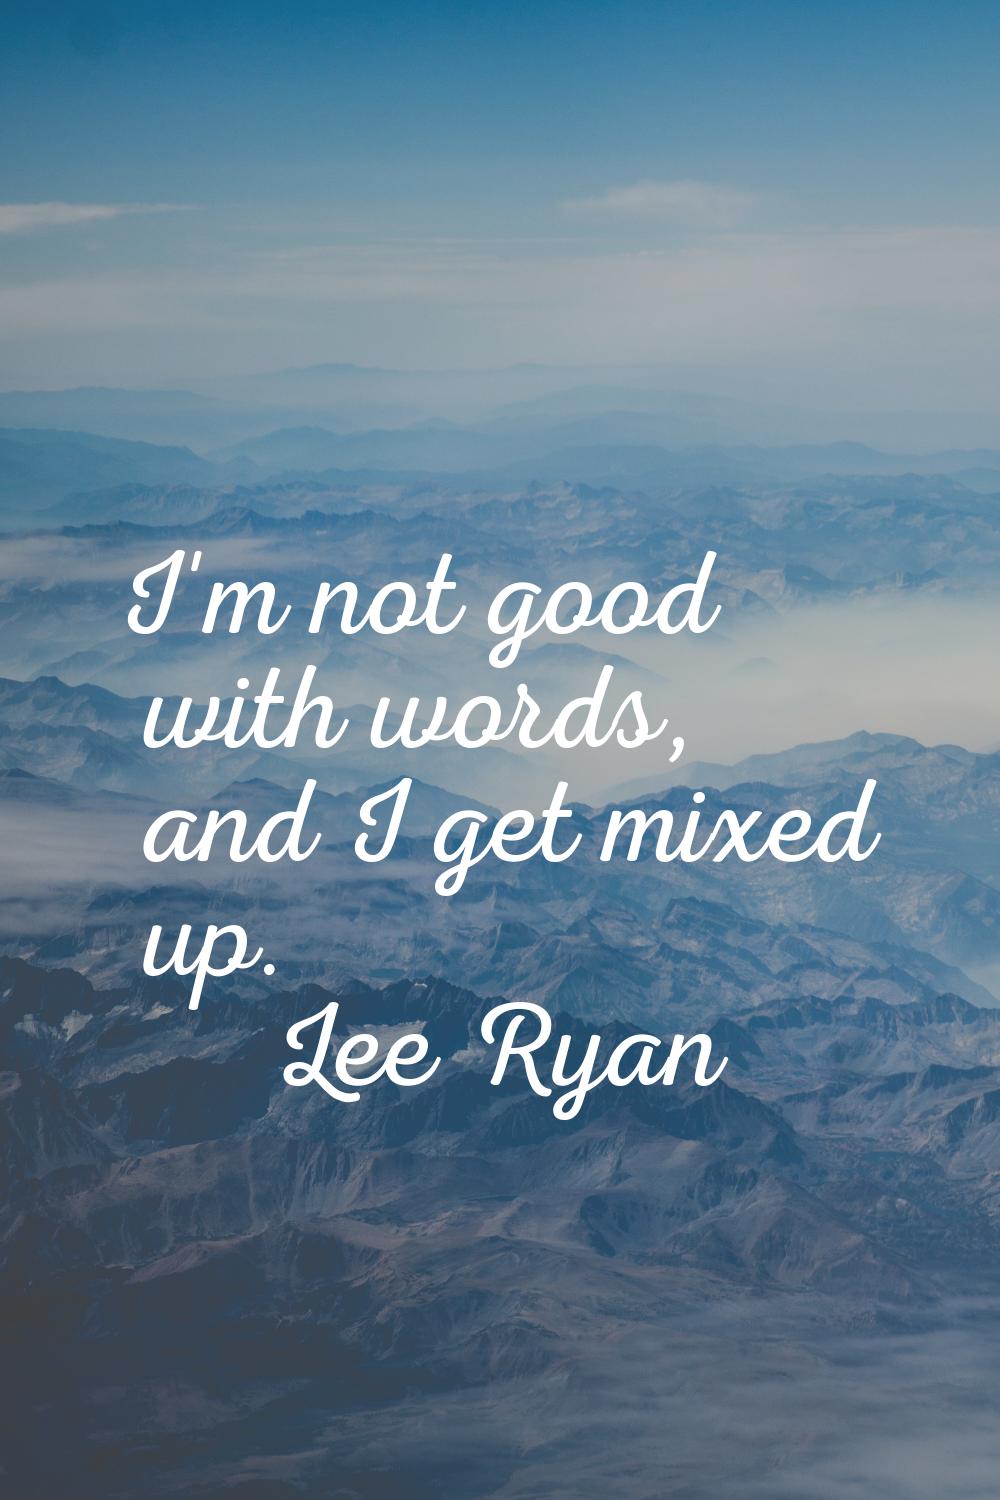 I'm not good with words, and I get mixed up.